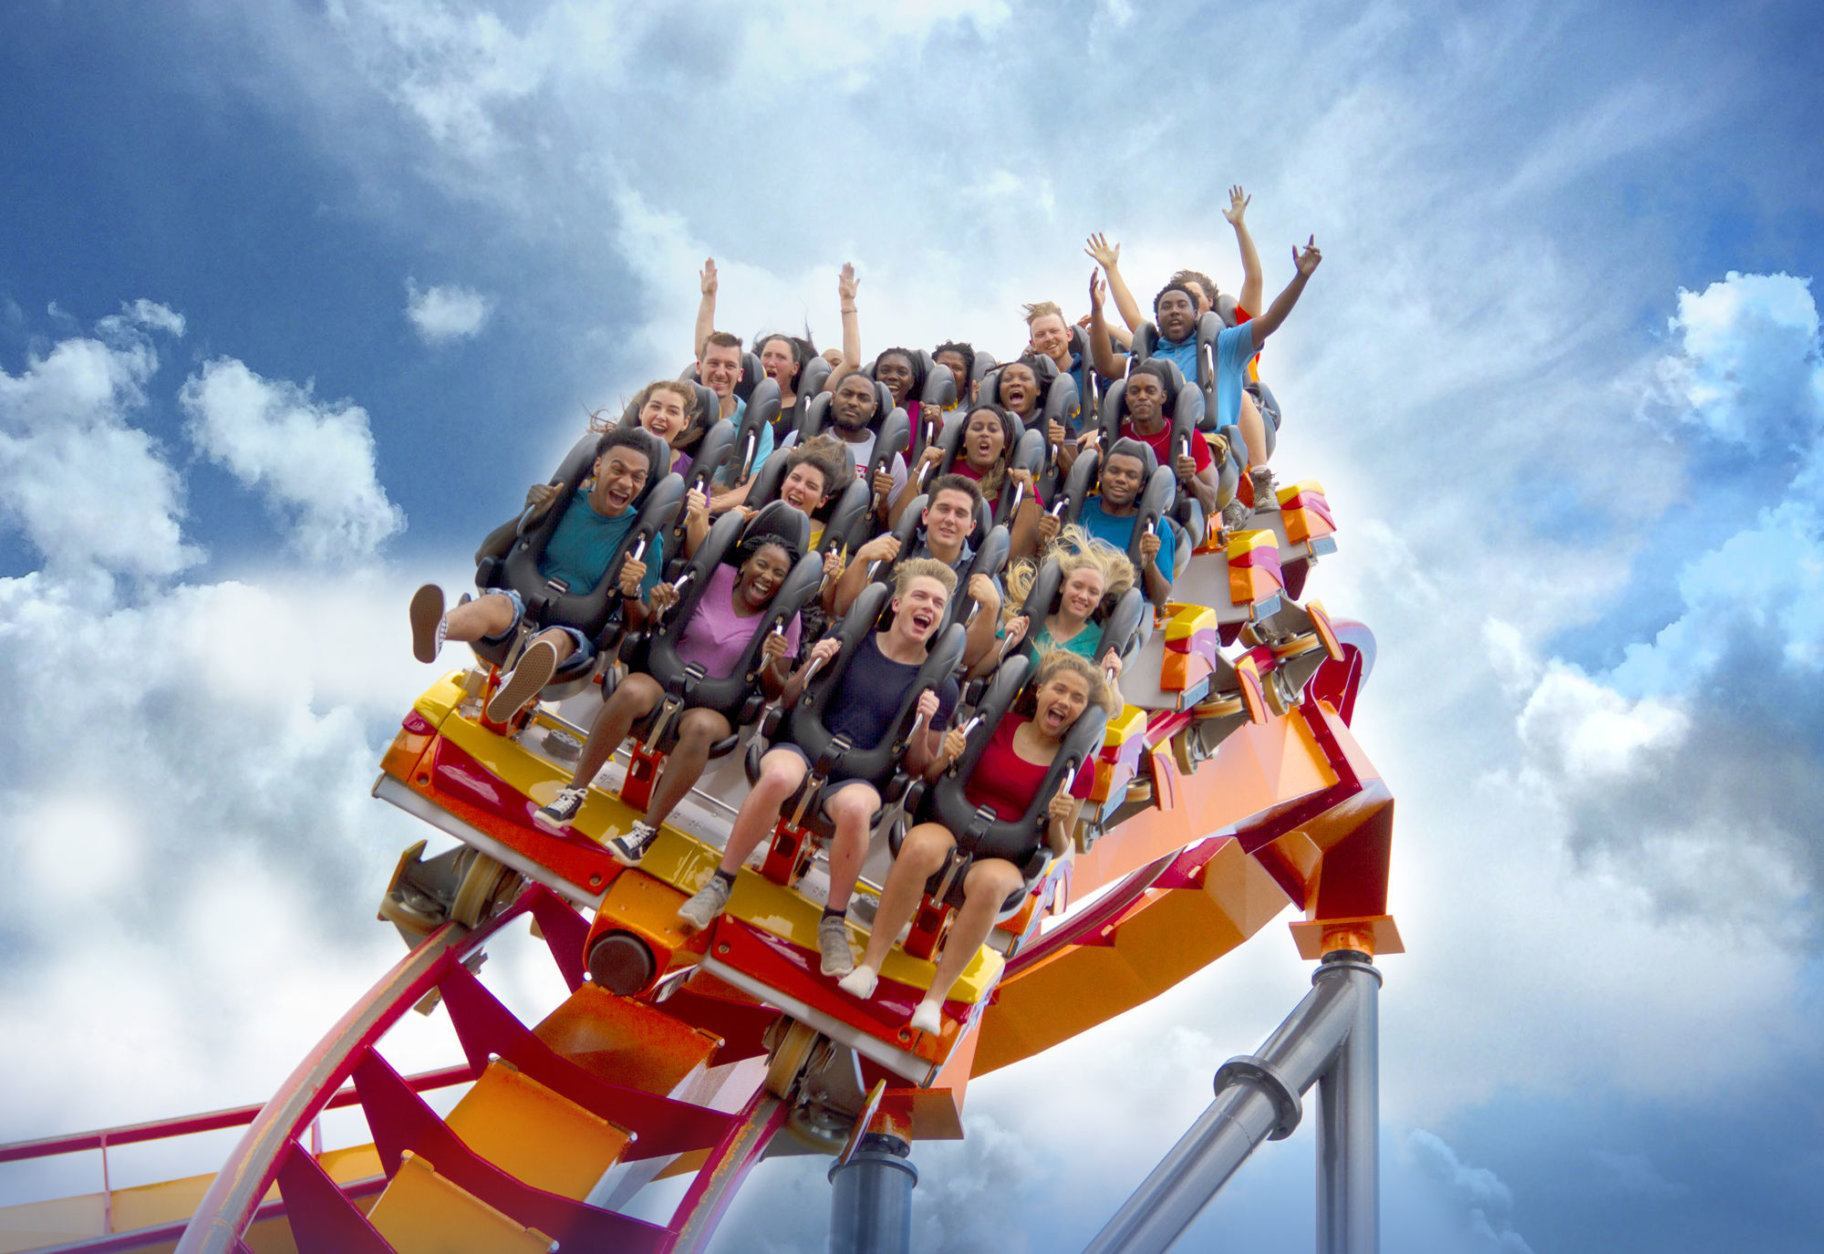 The floorless ride gets up to 56 mph over more than a half-mile of track. (Courtesy Six Flags America)